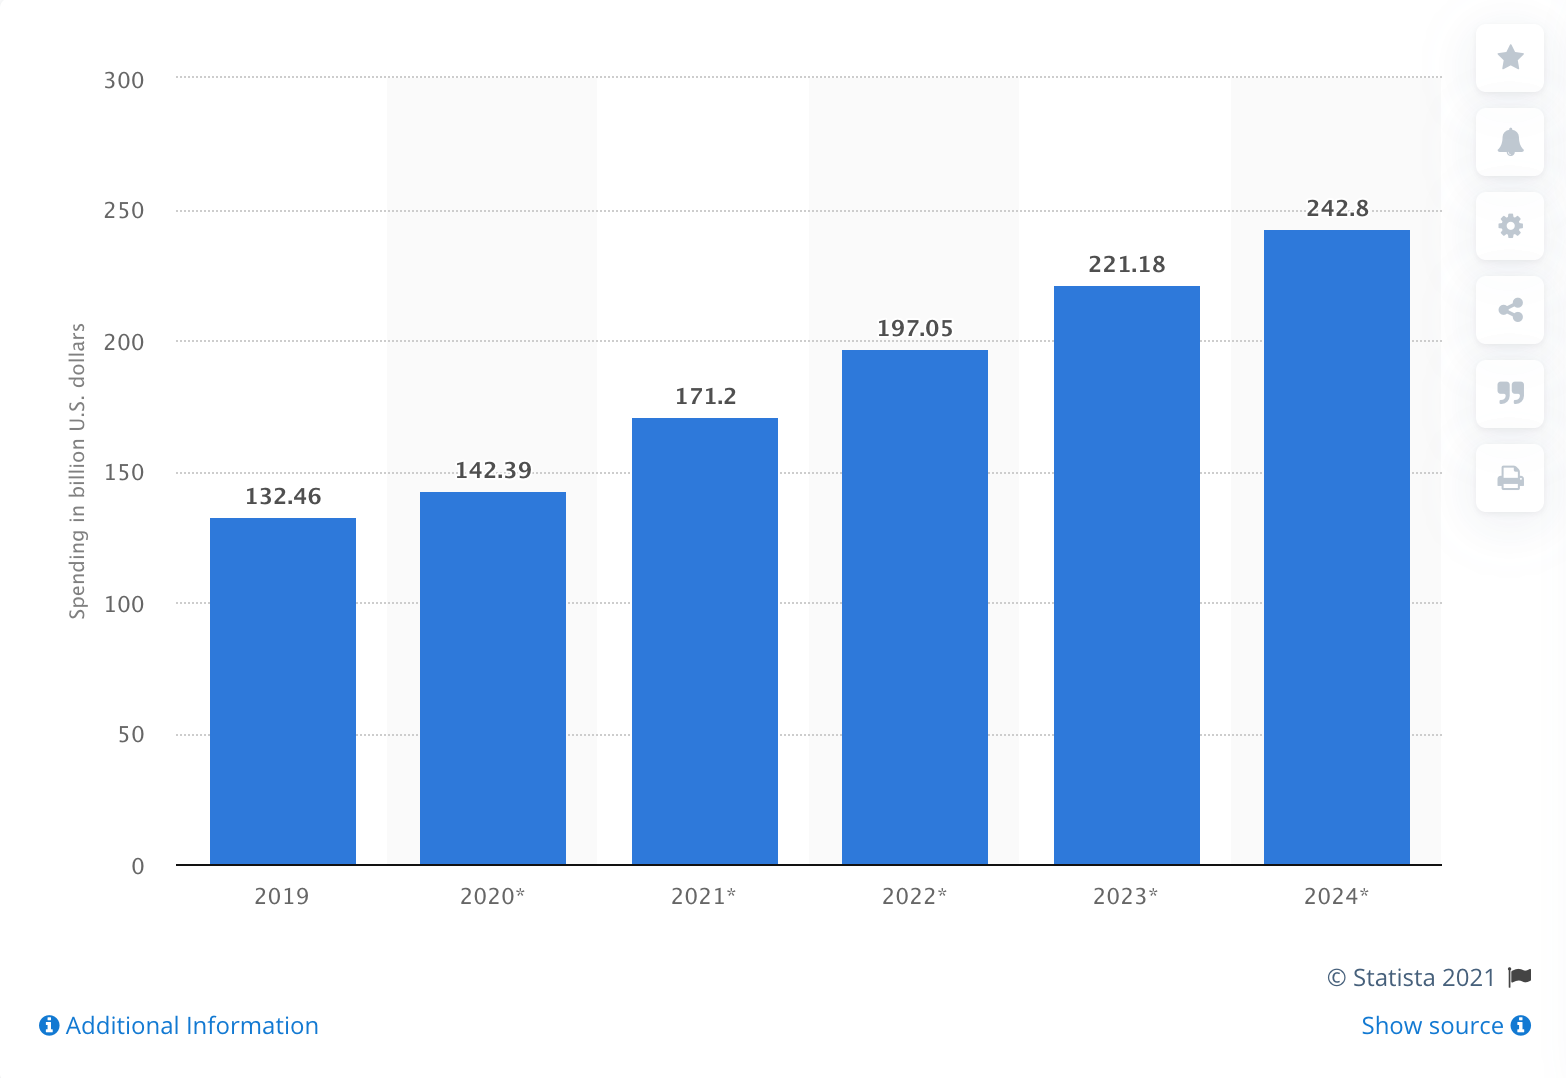 Digital advertising spending in the United States from 2019 to 2024 (in billion U.S. dollars)